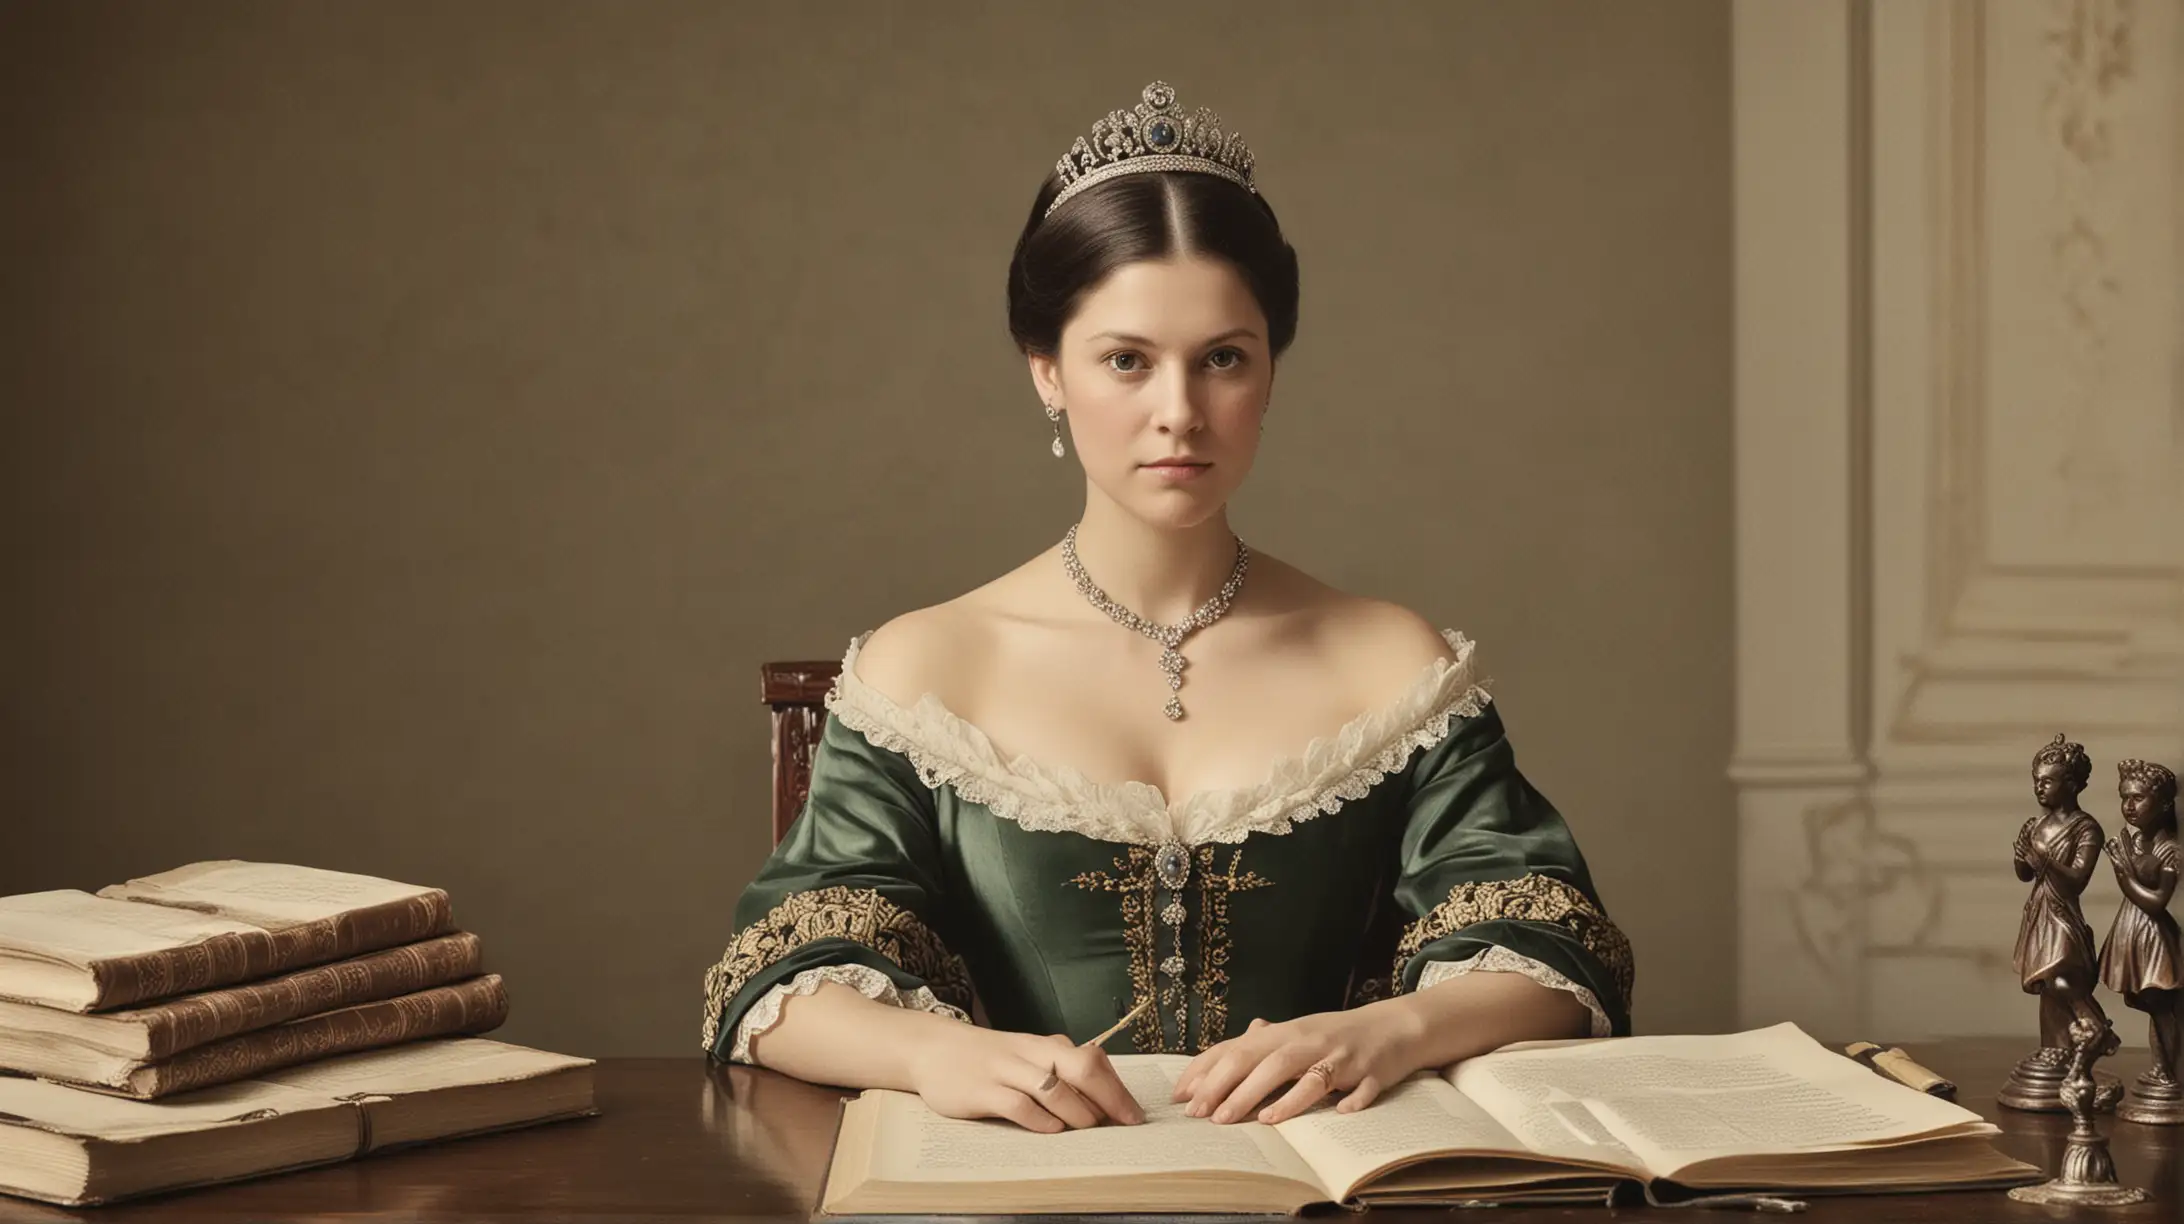 Princess Victoria Engaged in Scholarly Pursuits